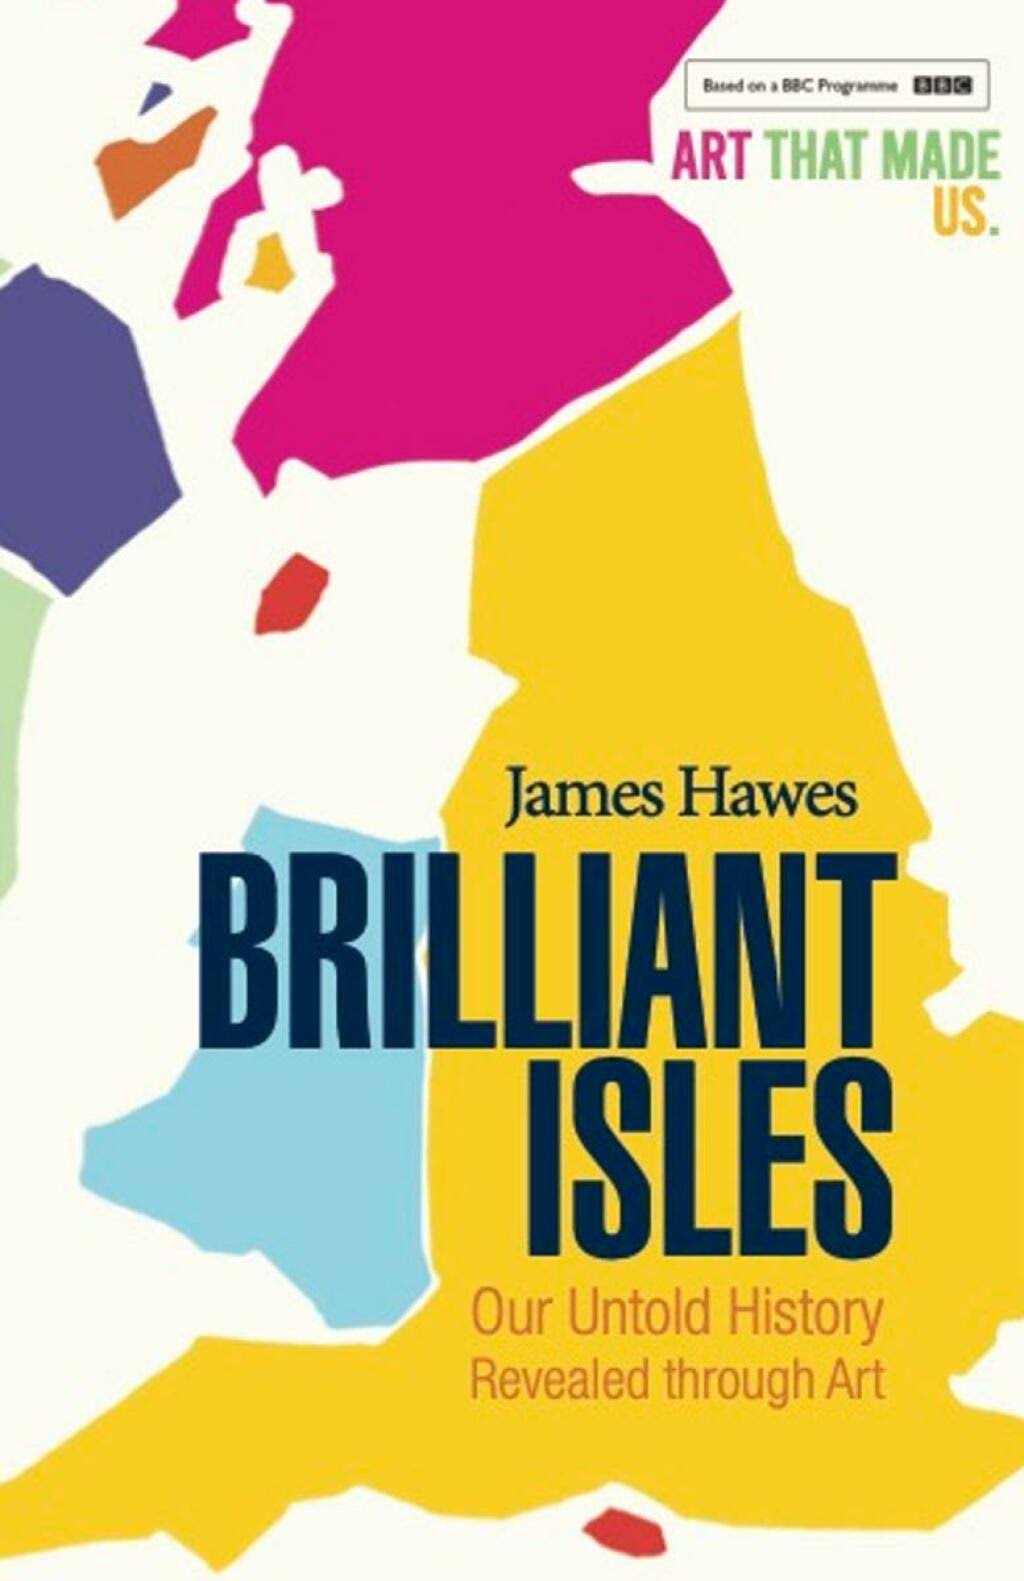 Brilliant Isles by James Hawes